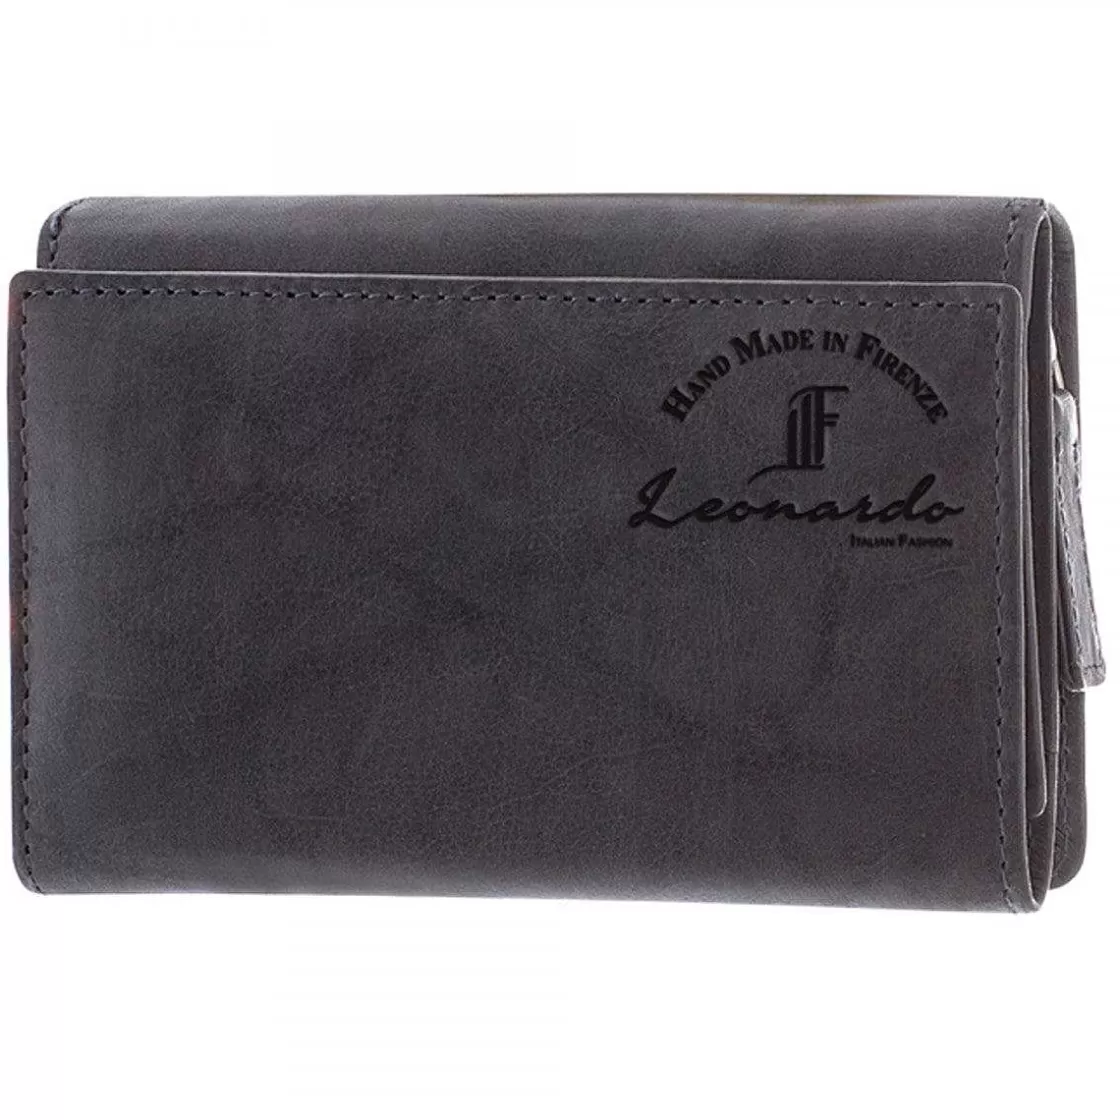 Leonardo Women'S Wallet Sauvage Handmade In Gray Calf Leather For Banknote Cards With Flap Cheap